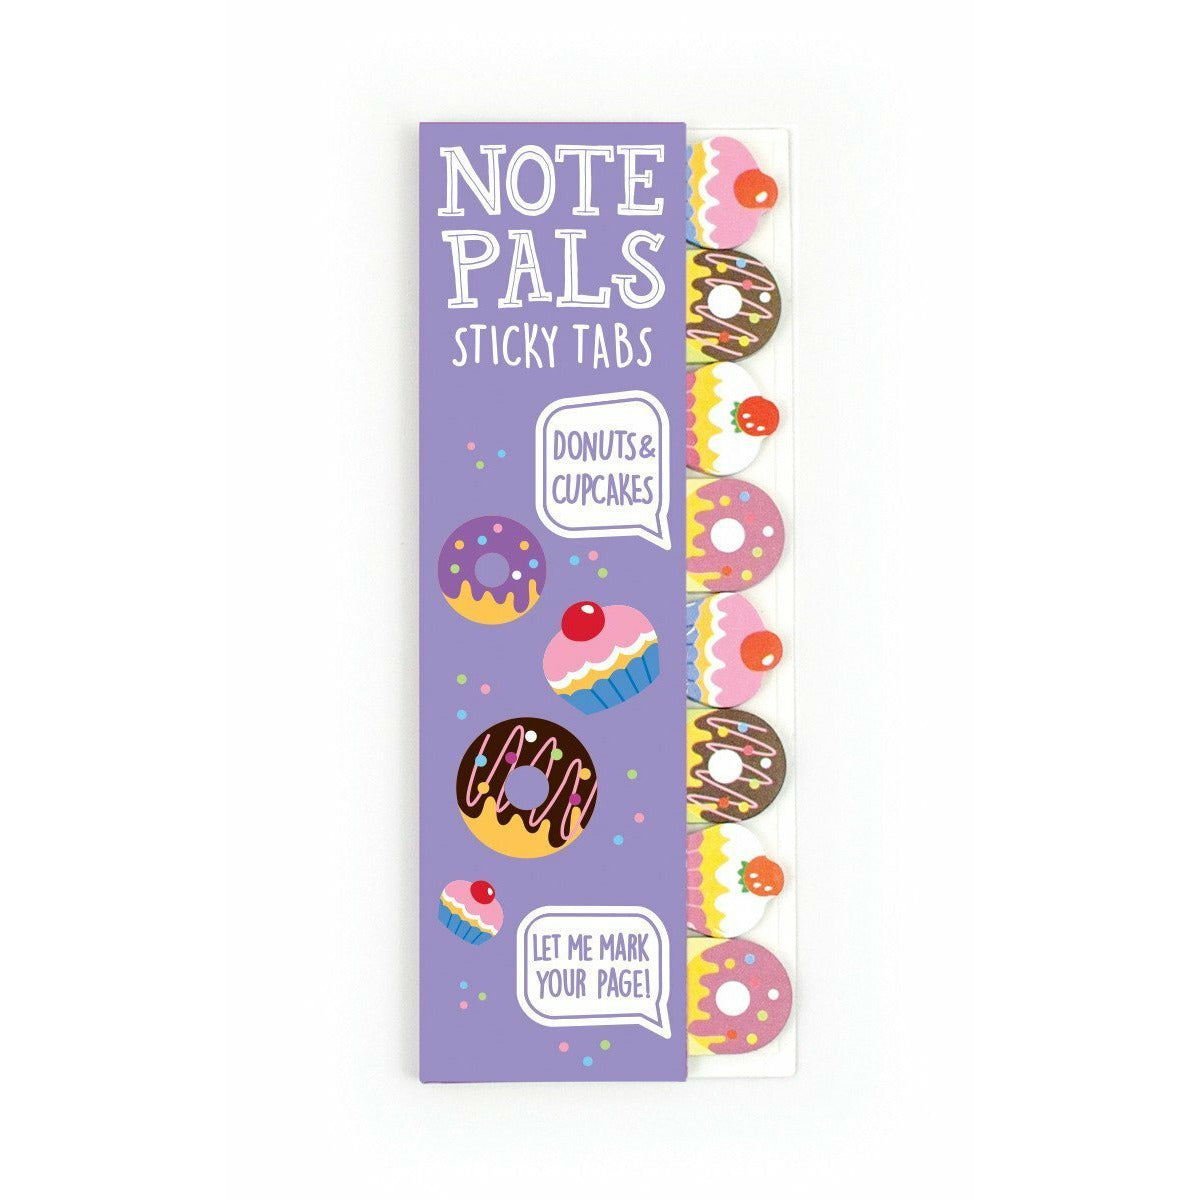 Ooly Stationery Donuts and Cakes Note Pals - Sticky Tabs 0720252999531 tween and teen